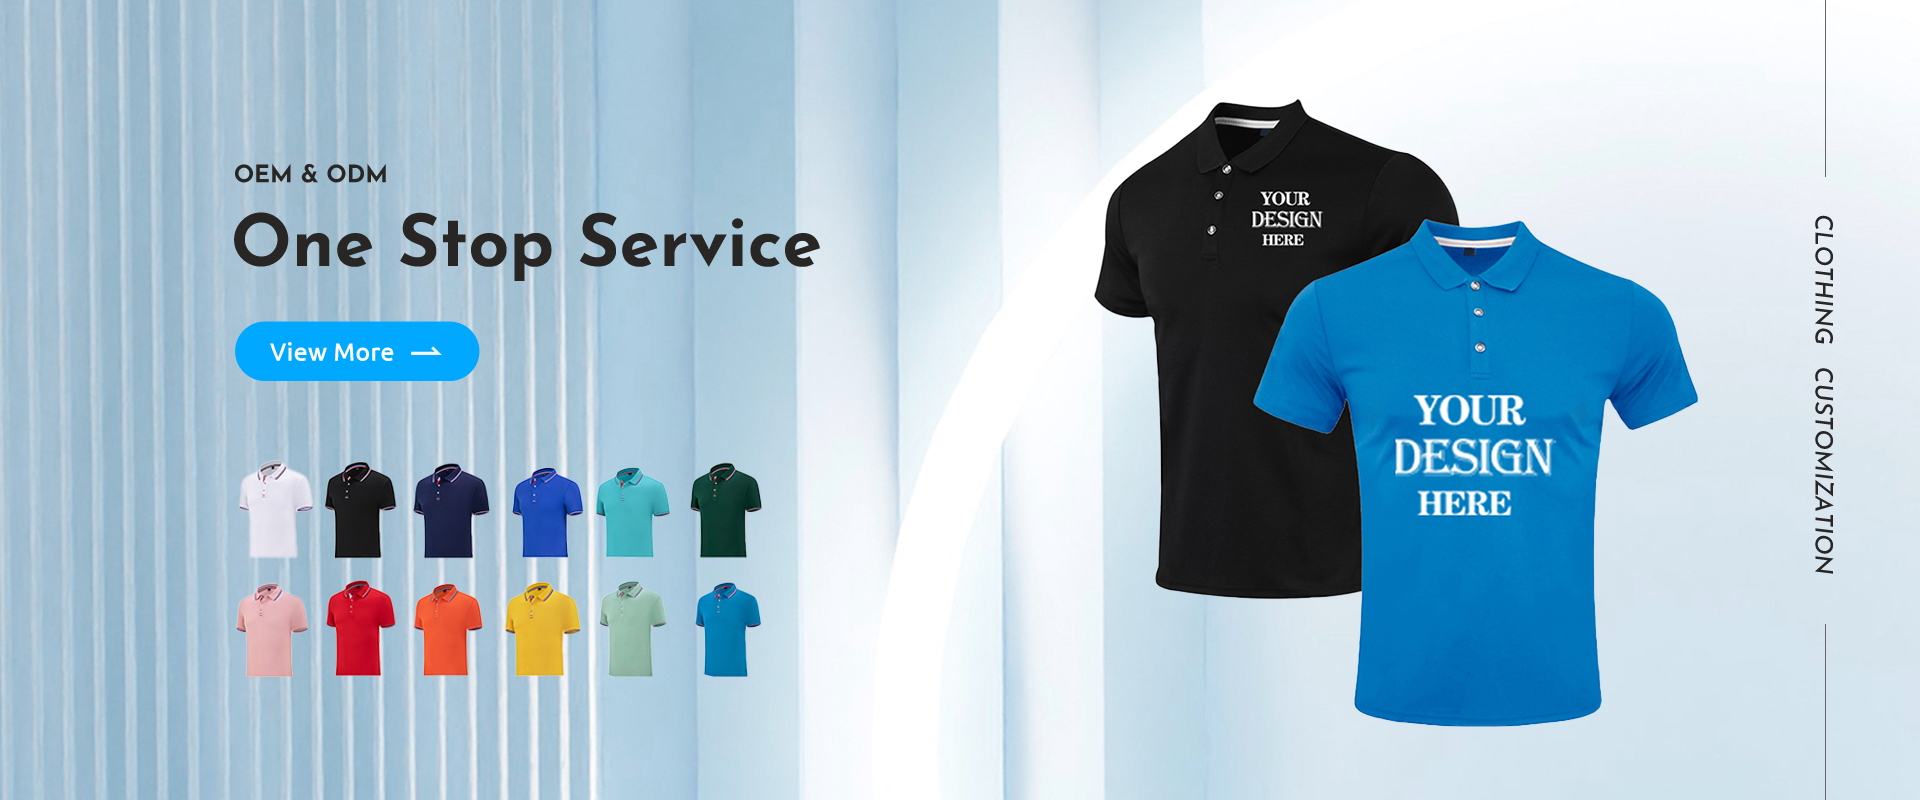 OEM&ODM Service for Clothing